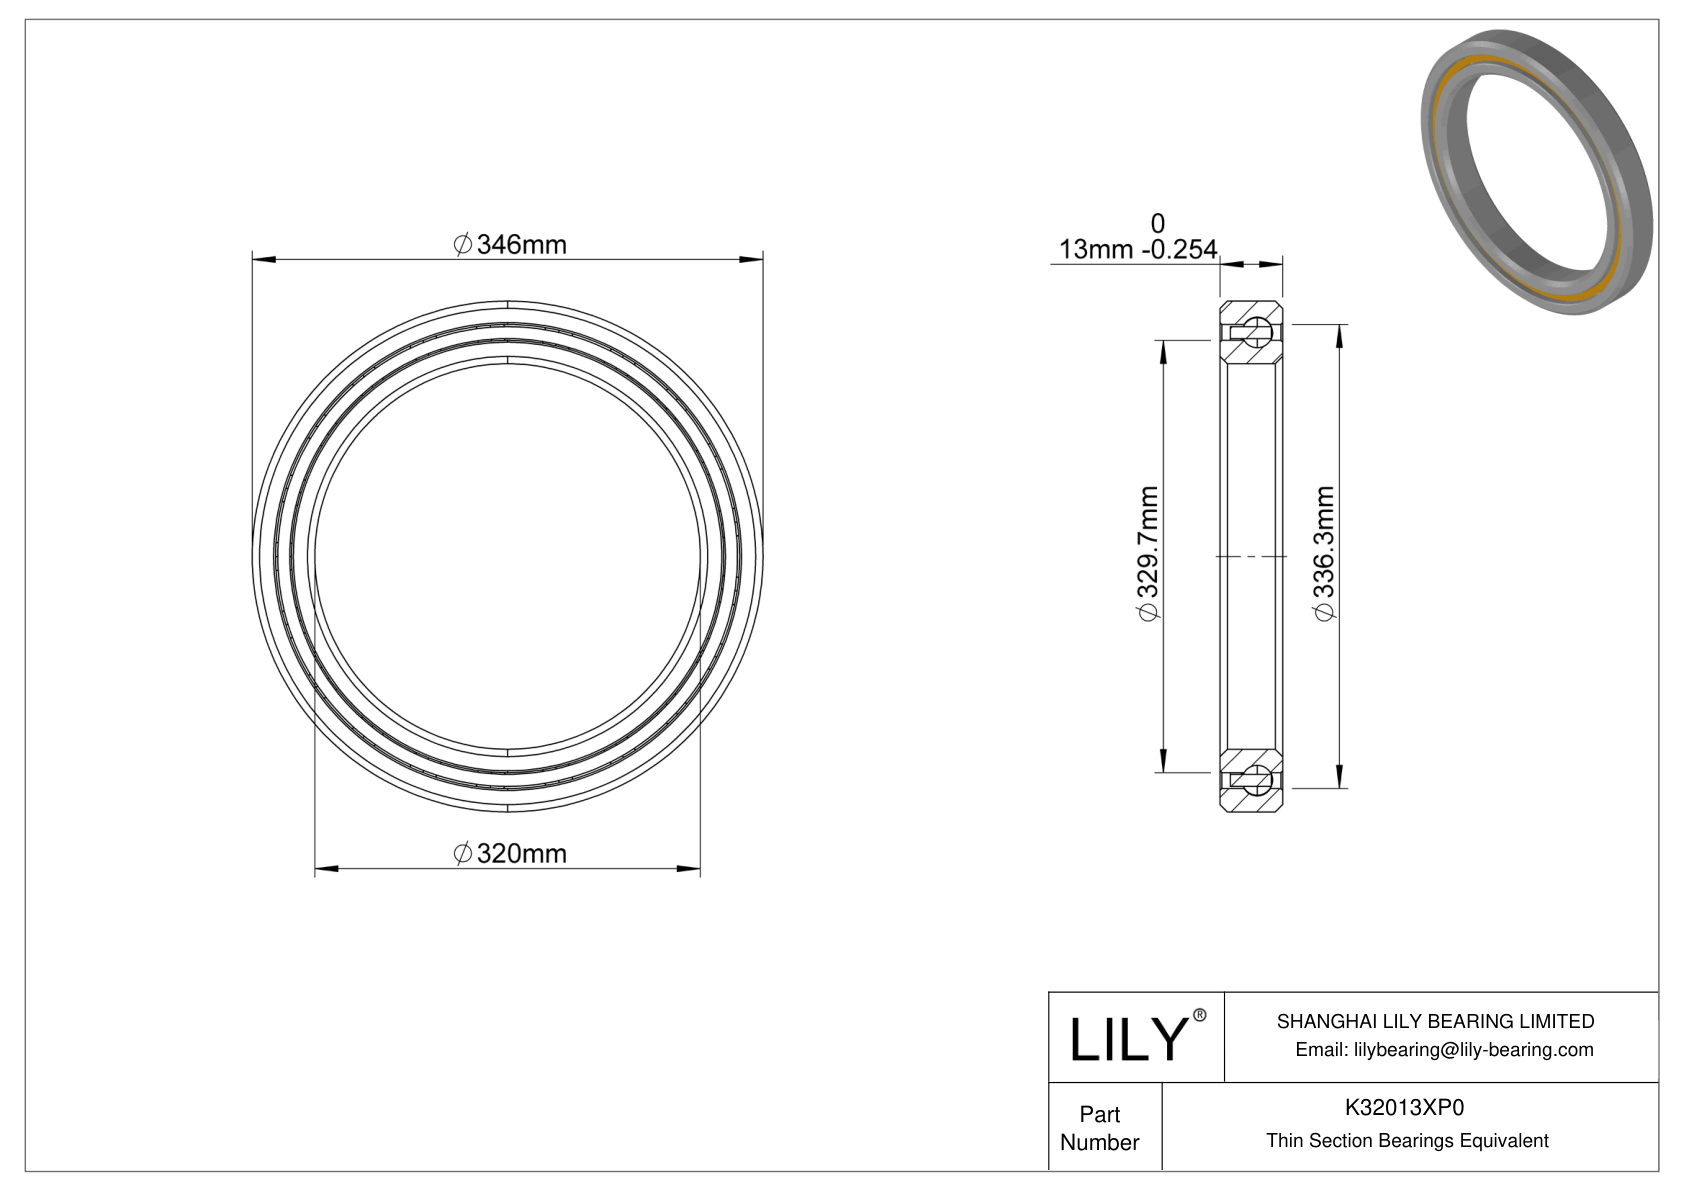 K32013XP0 Constant Section (CS) Bearings cad drawing